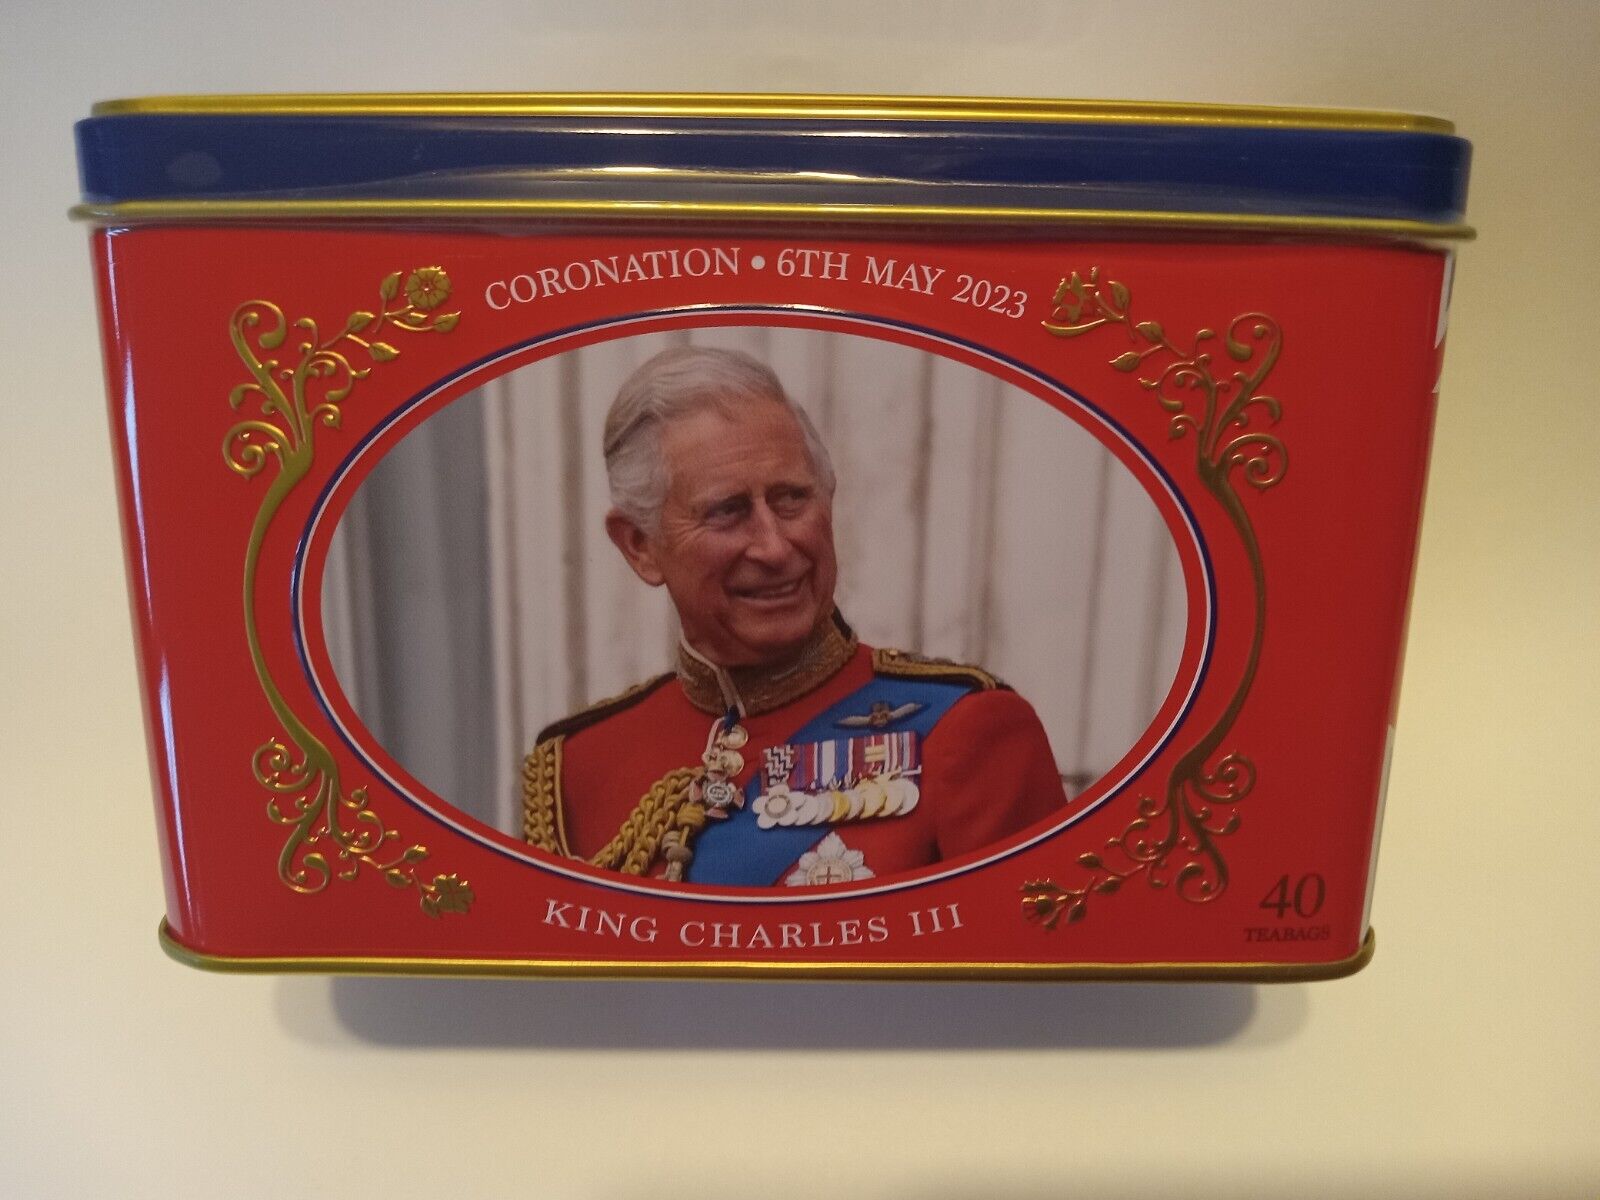 THE CORONATION OF HRH KING CHARLES III, 6TH MAY 2023 COLLEC. TEA TIN 40 SEALED 